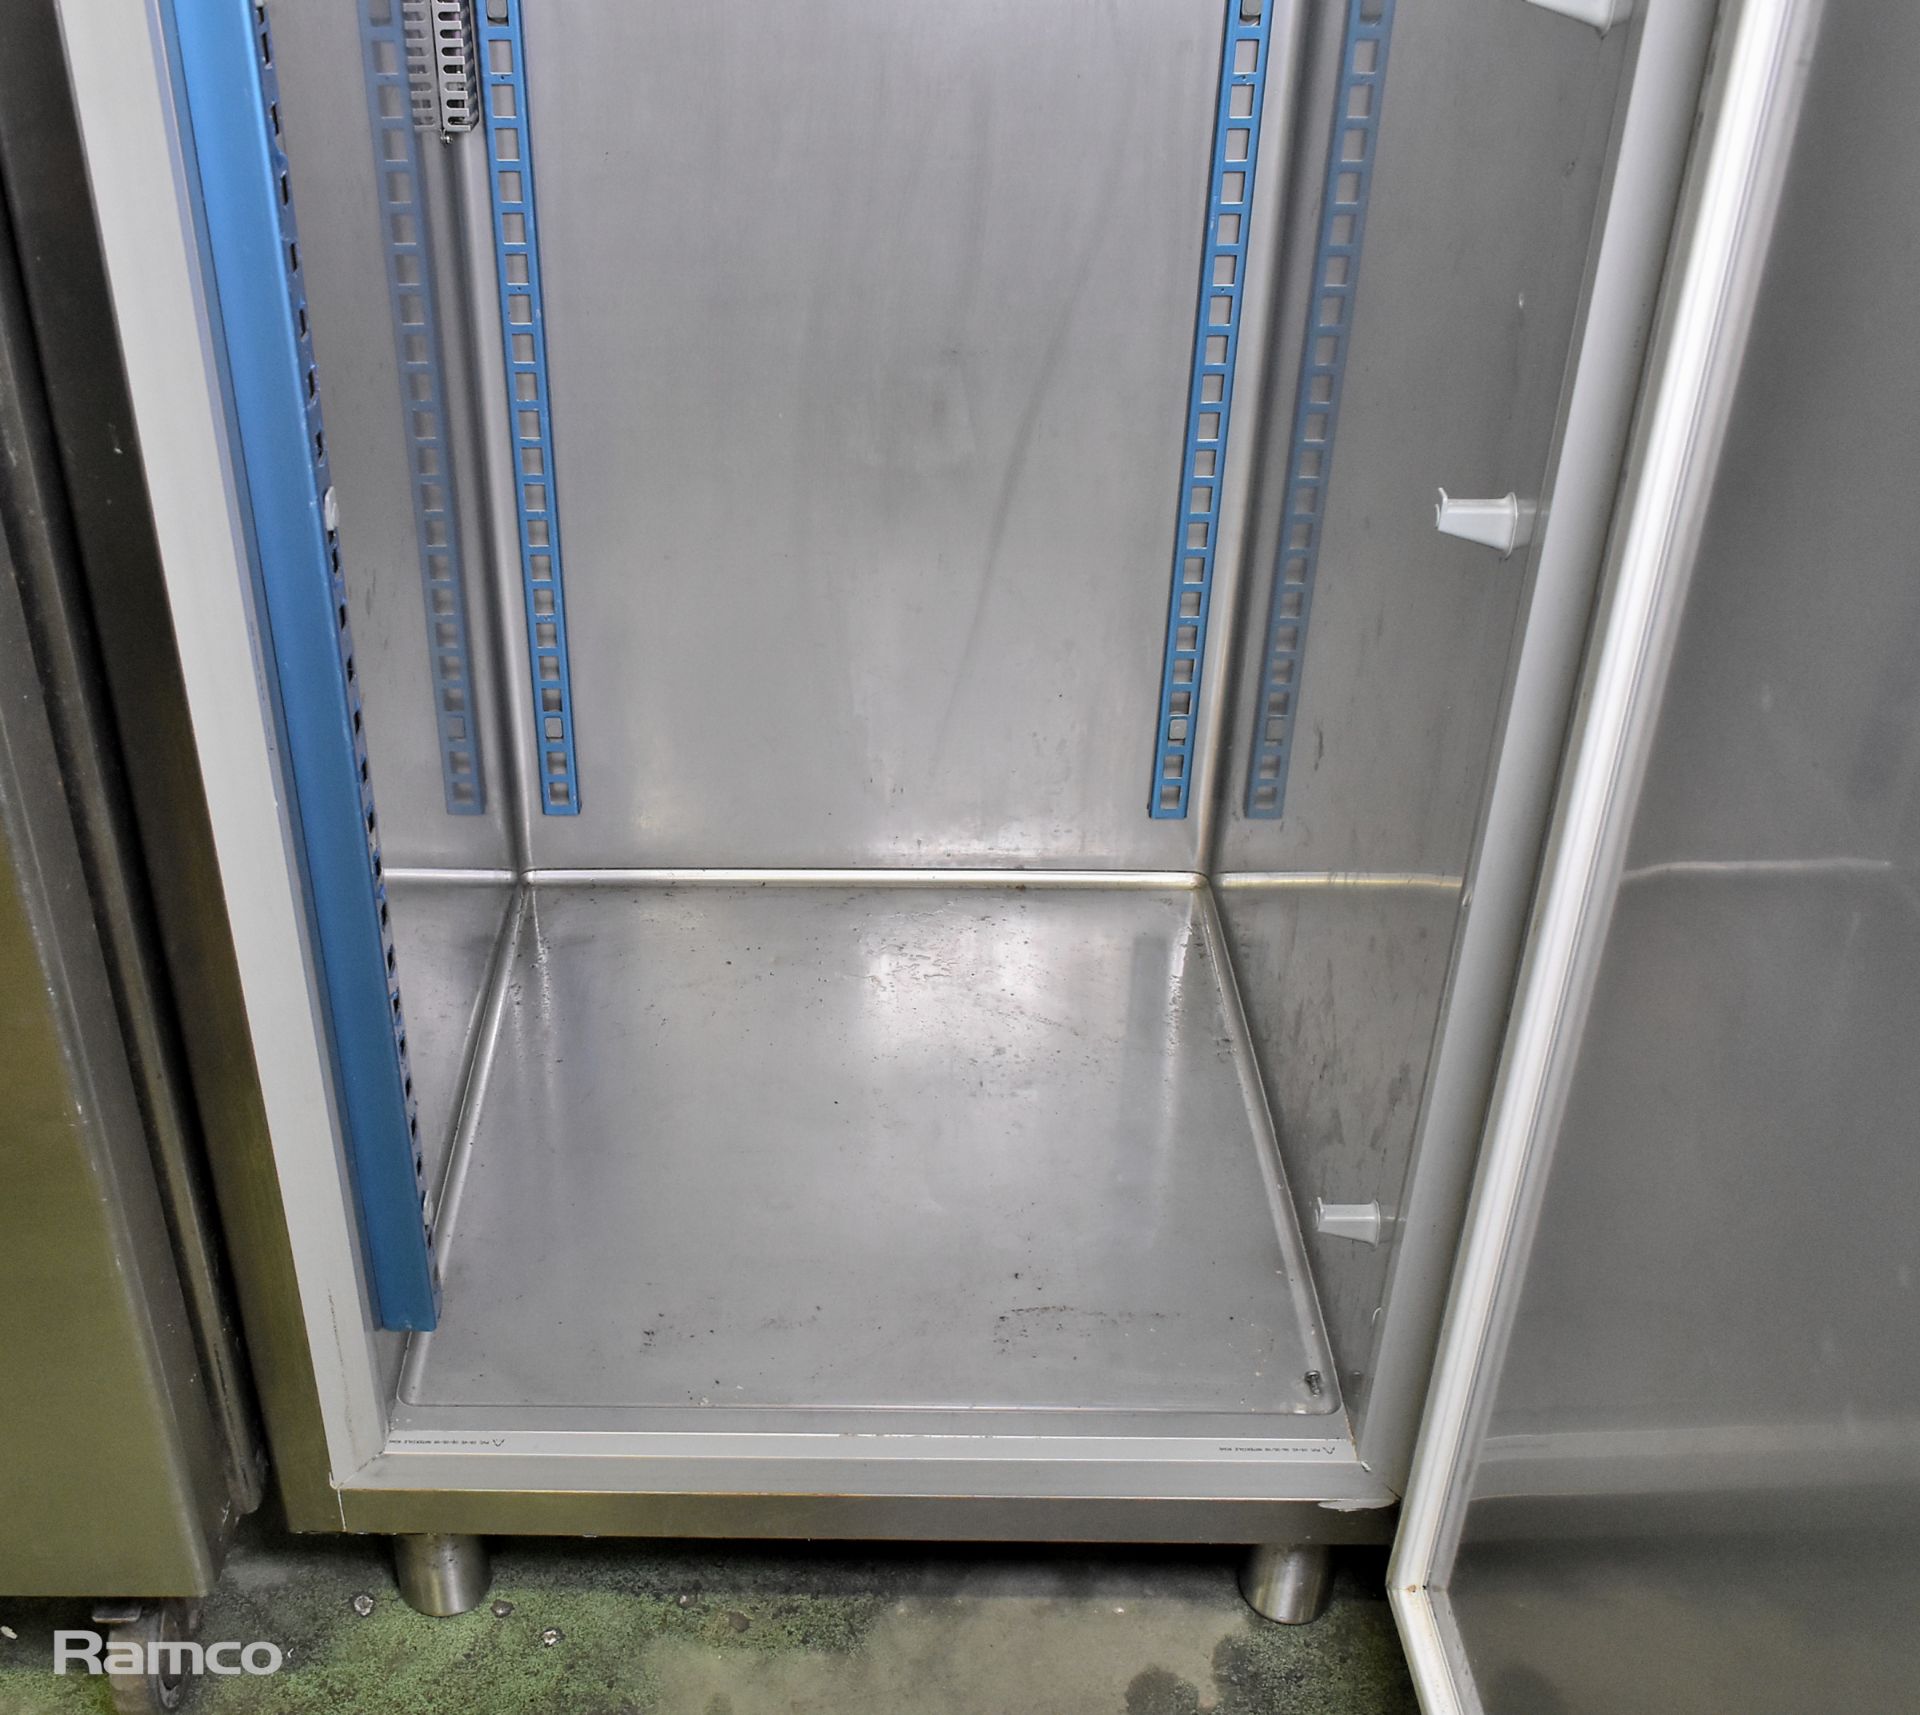 Electrolux RH06RD1F Stainless steel, single, upright freezer - W 750 x D 795 x H 2075mm - Image 3 of 6